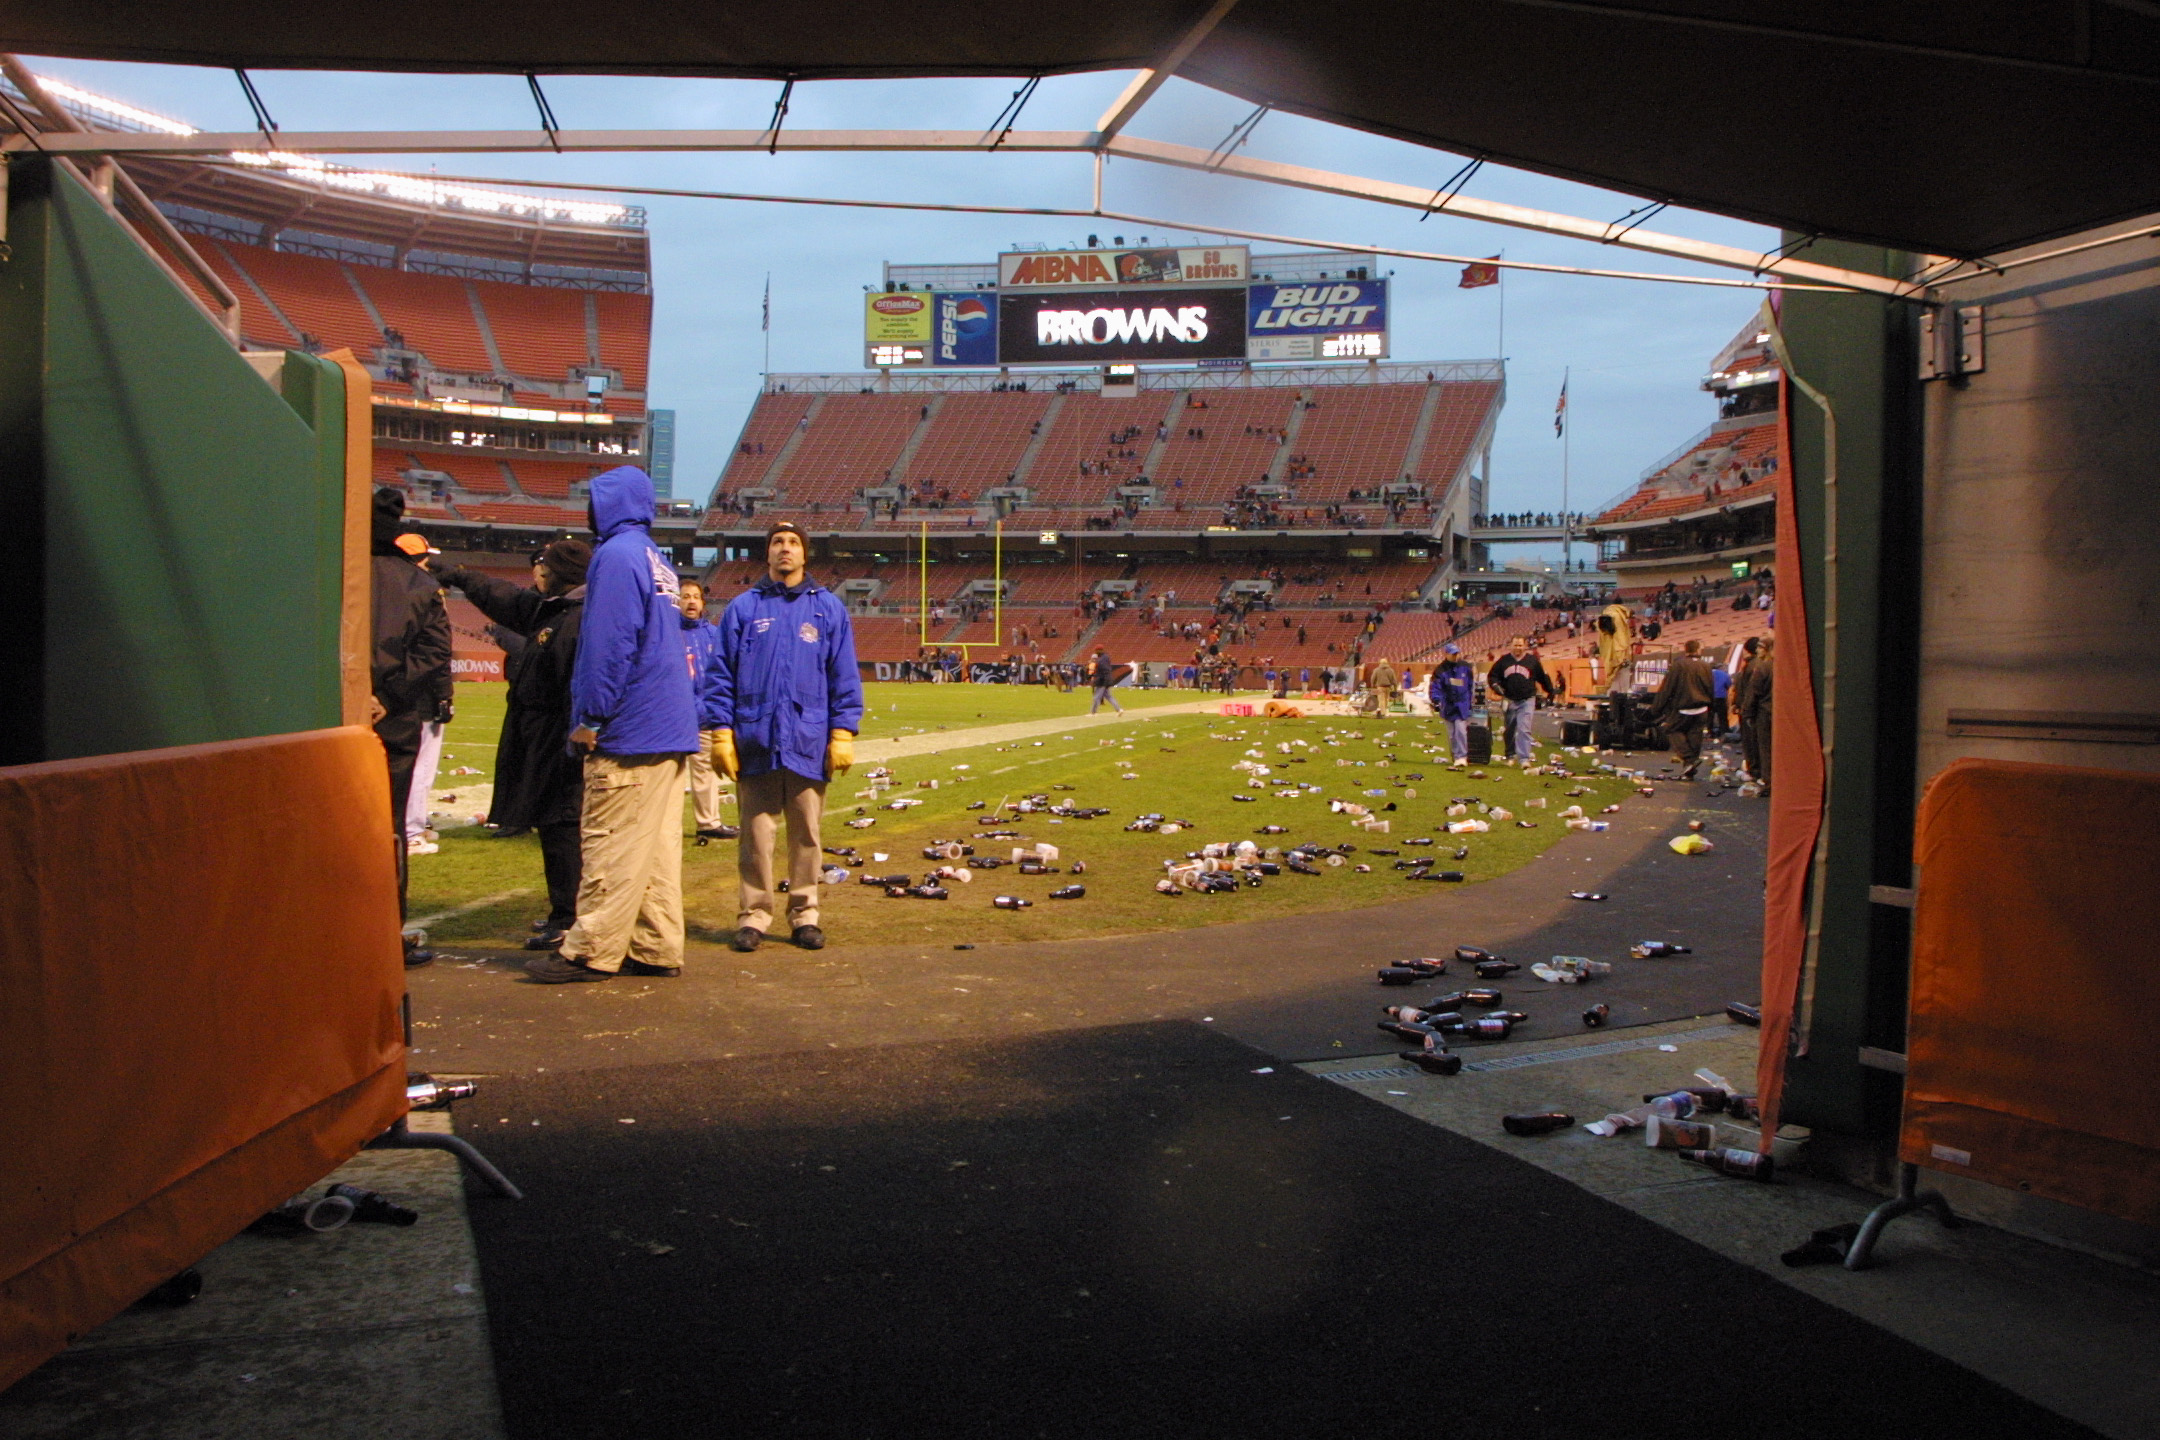 16 Dec 2001 : The field is littered with bottles and debris after fans expressed their displeasure on an officials call by throwing them late in the game between the Cleveland Browns and the Jacksonville Jaguars  at Cleveland Browns Stadium in Cleveland,